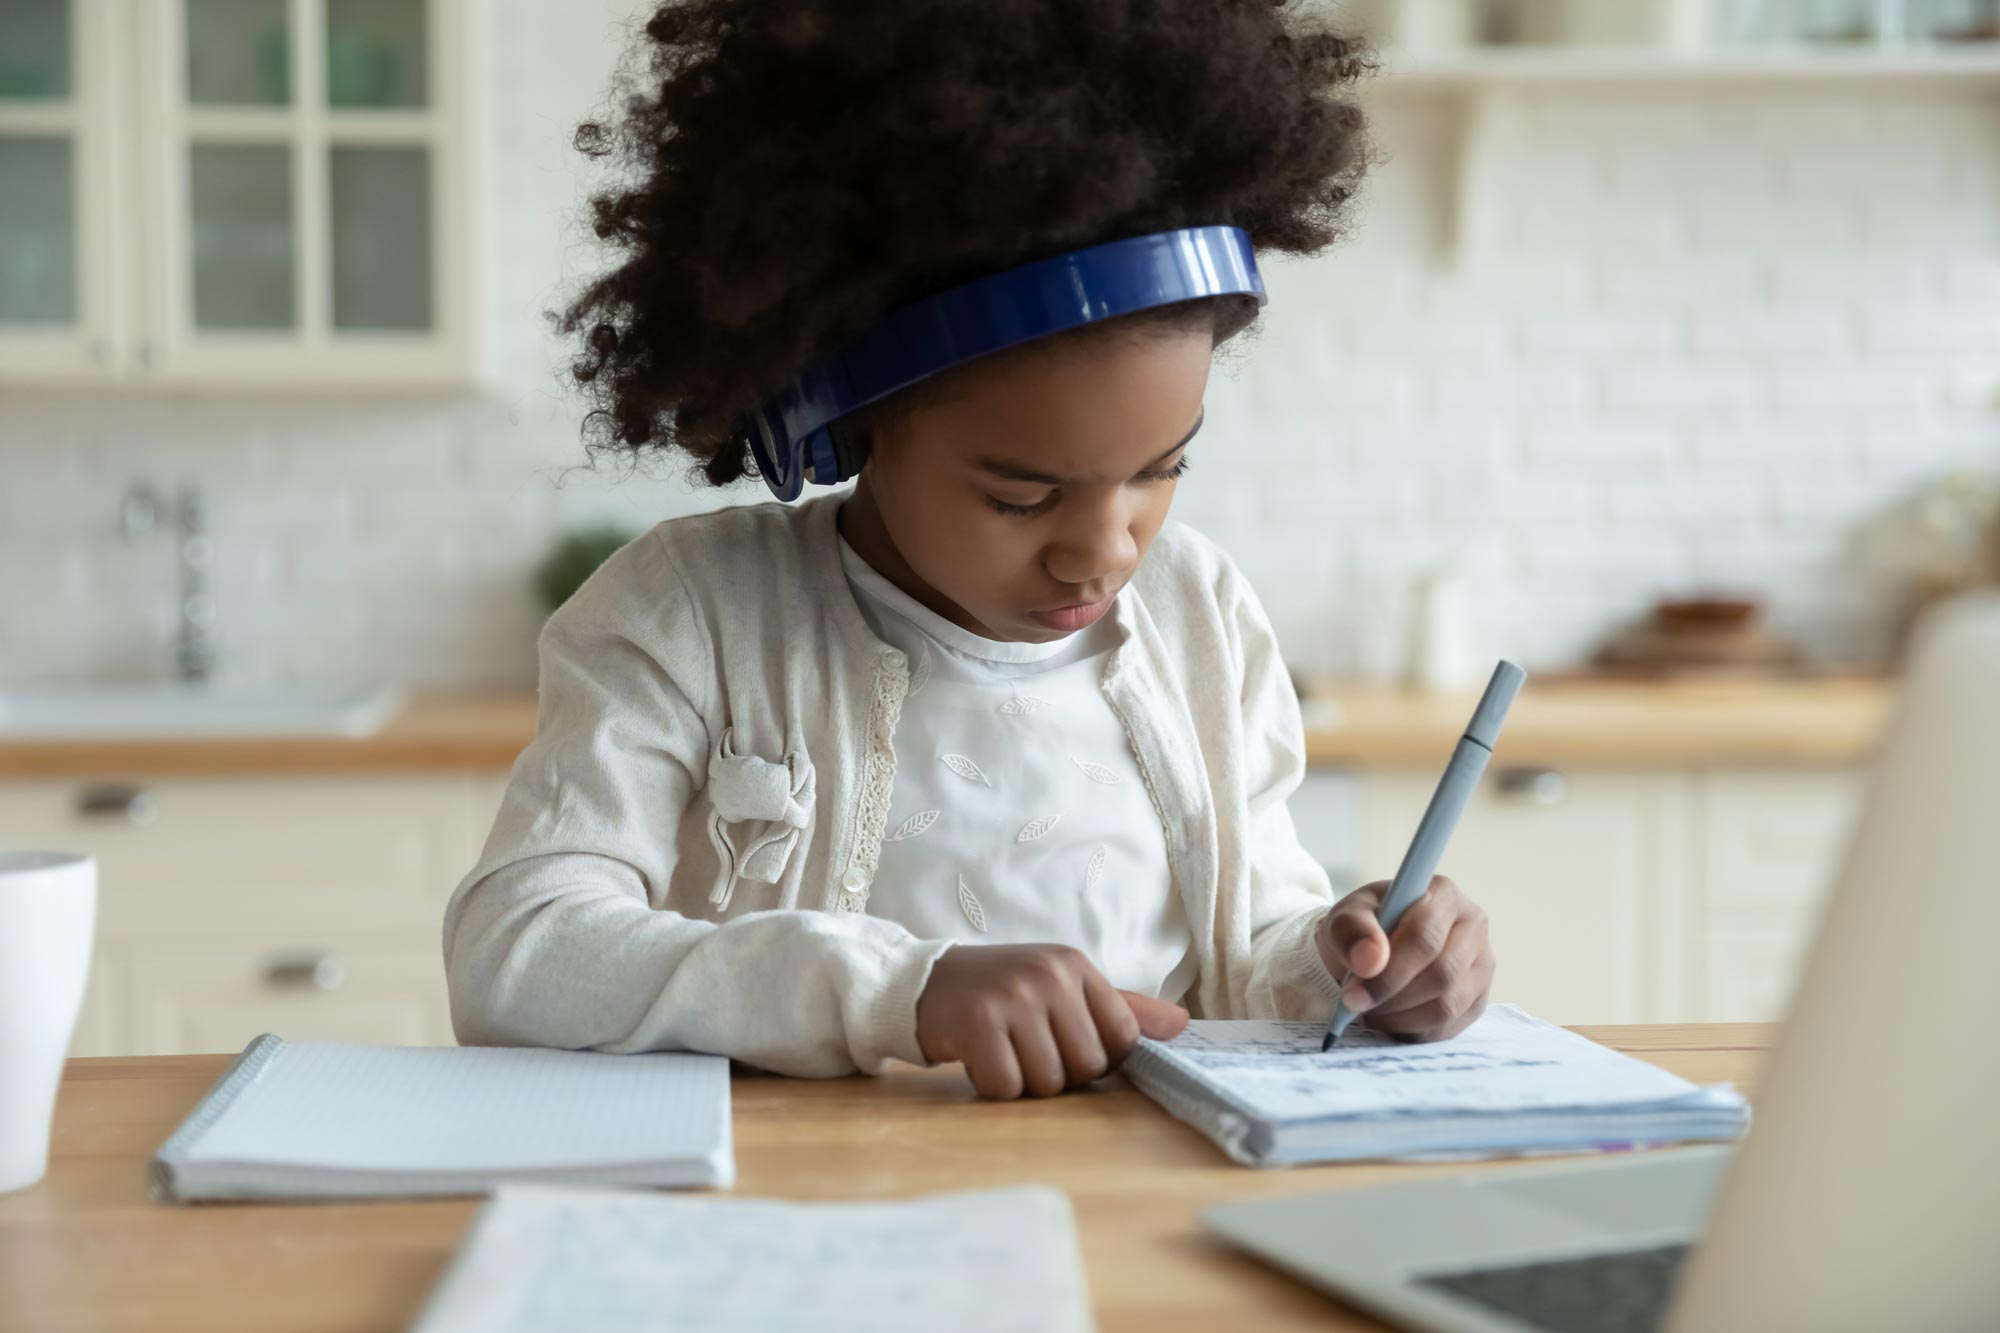 Child wearing headphones sitting at a table writing in a notebook